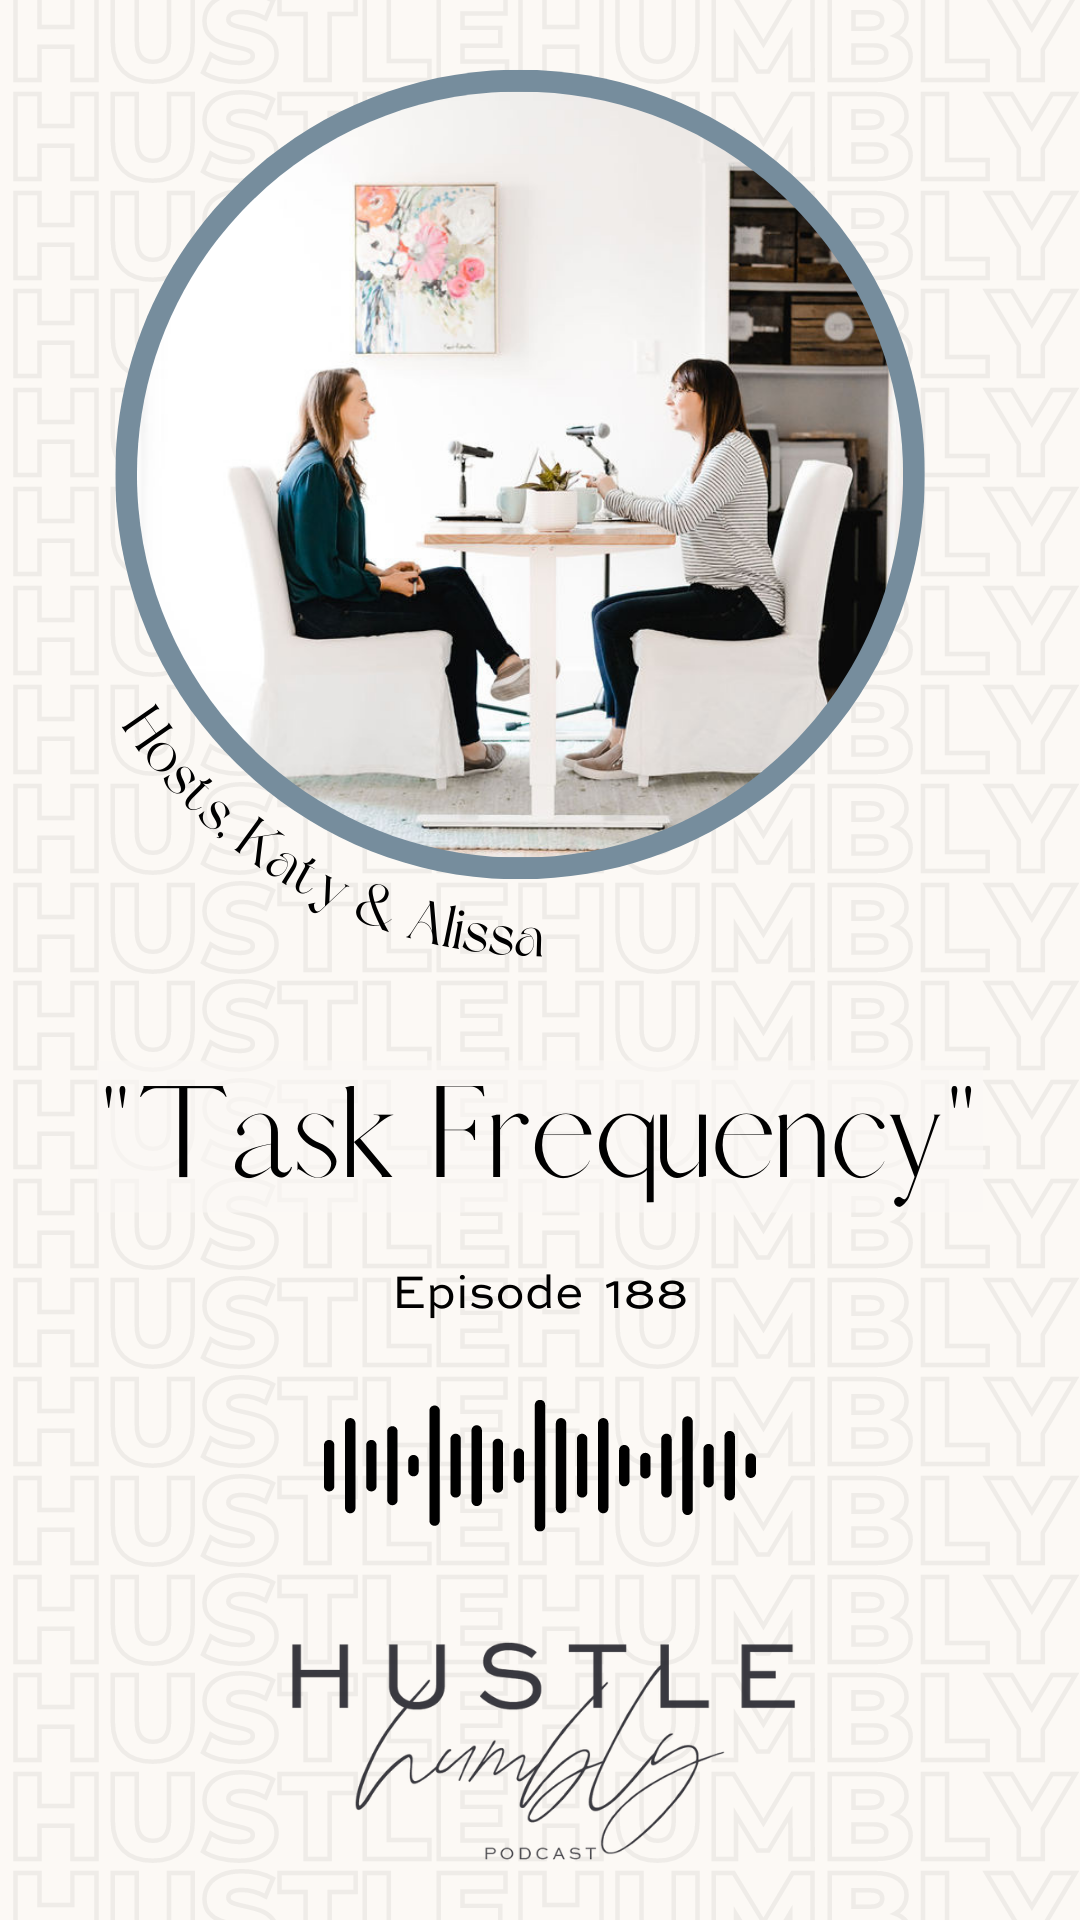 Hustle Humbly Podcast Episode 188: Task Frequency/What To Do and When To Do It